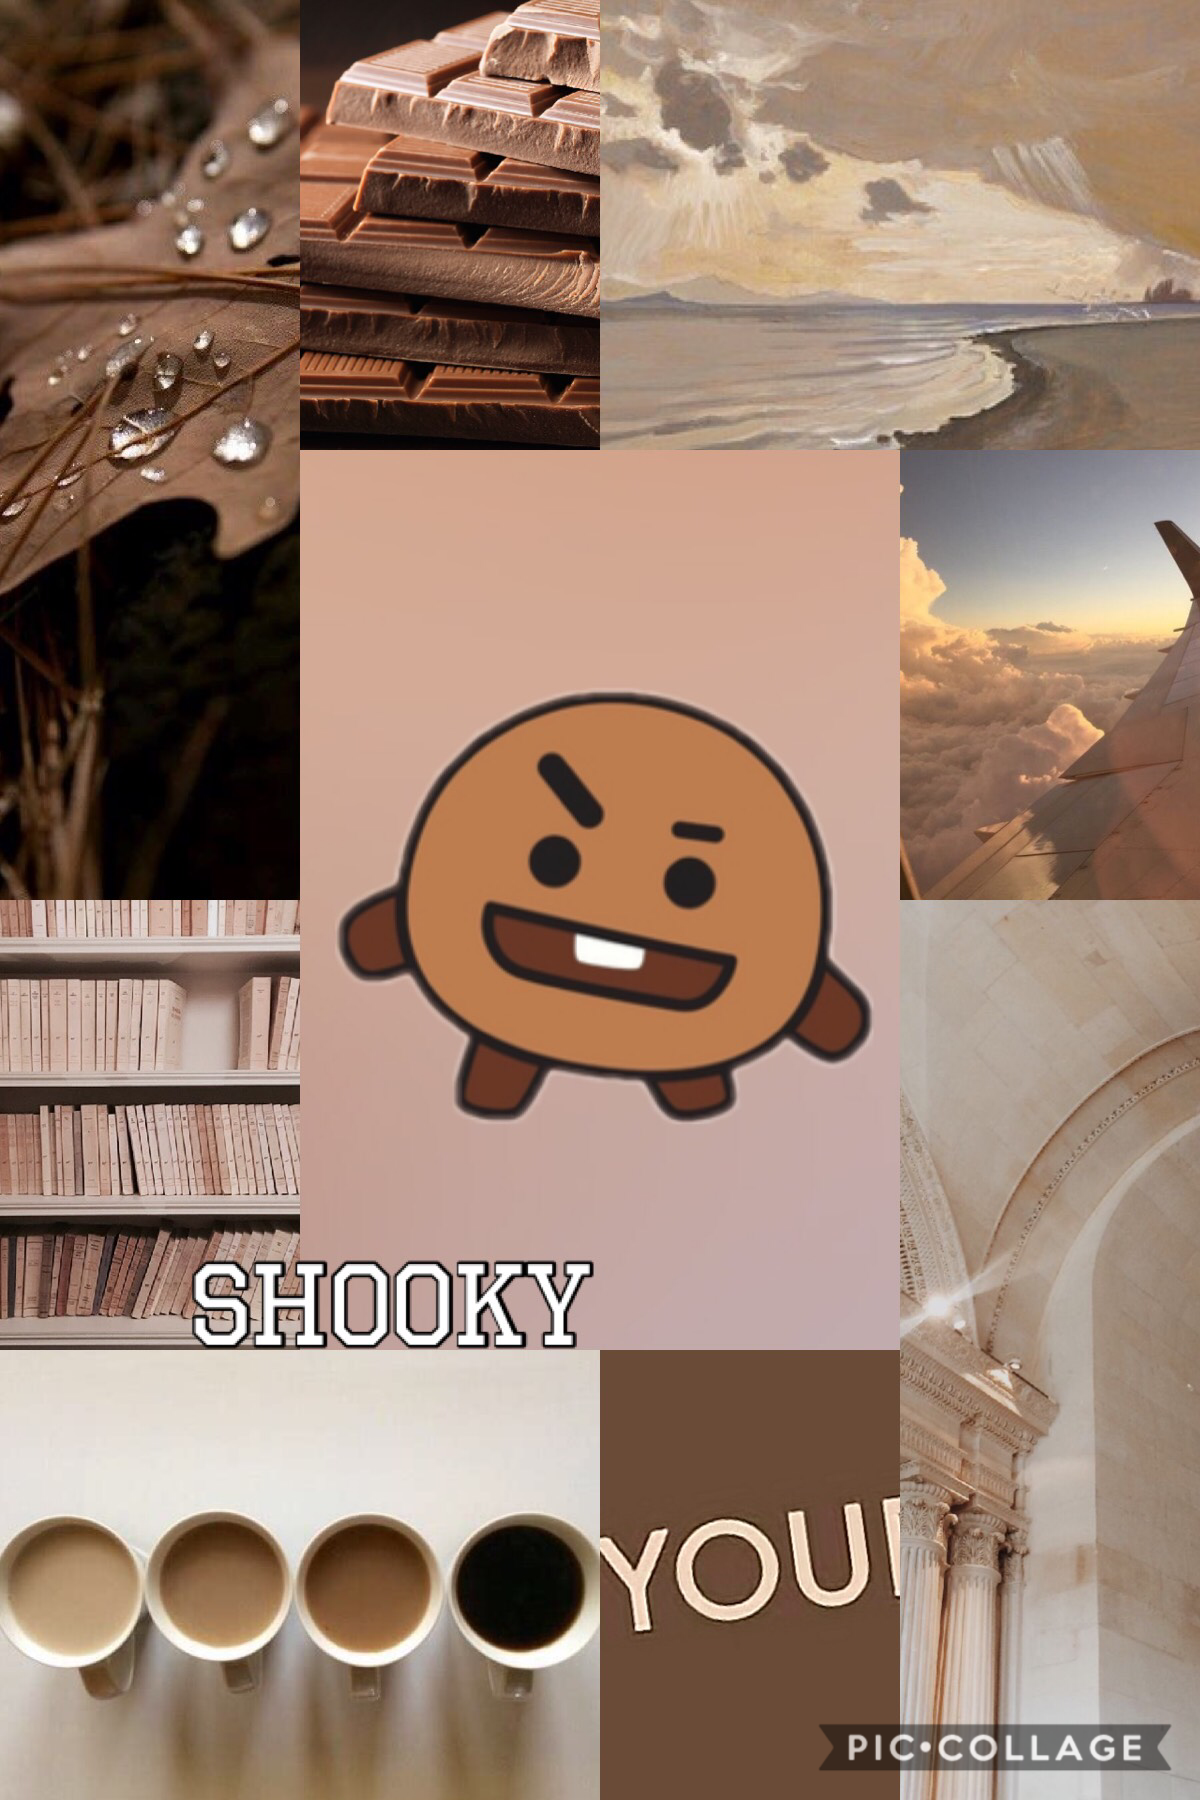 🍪Shooky🍪

Oh no, its just a failed attempt at being active, yay! 